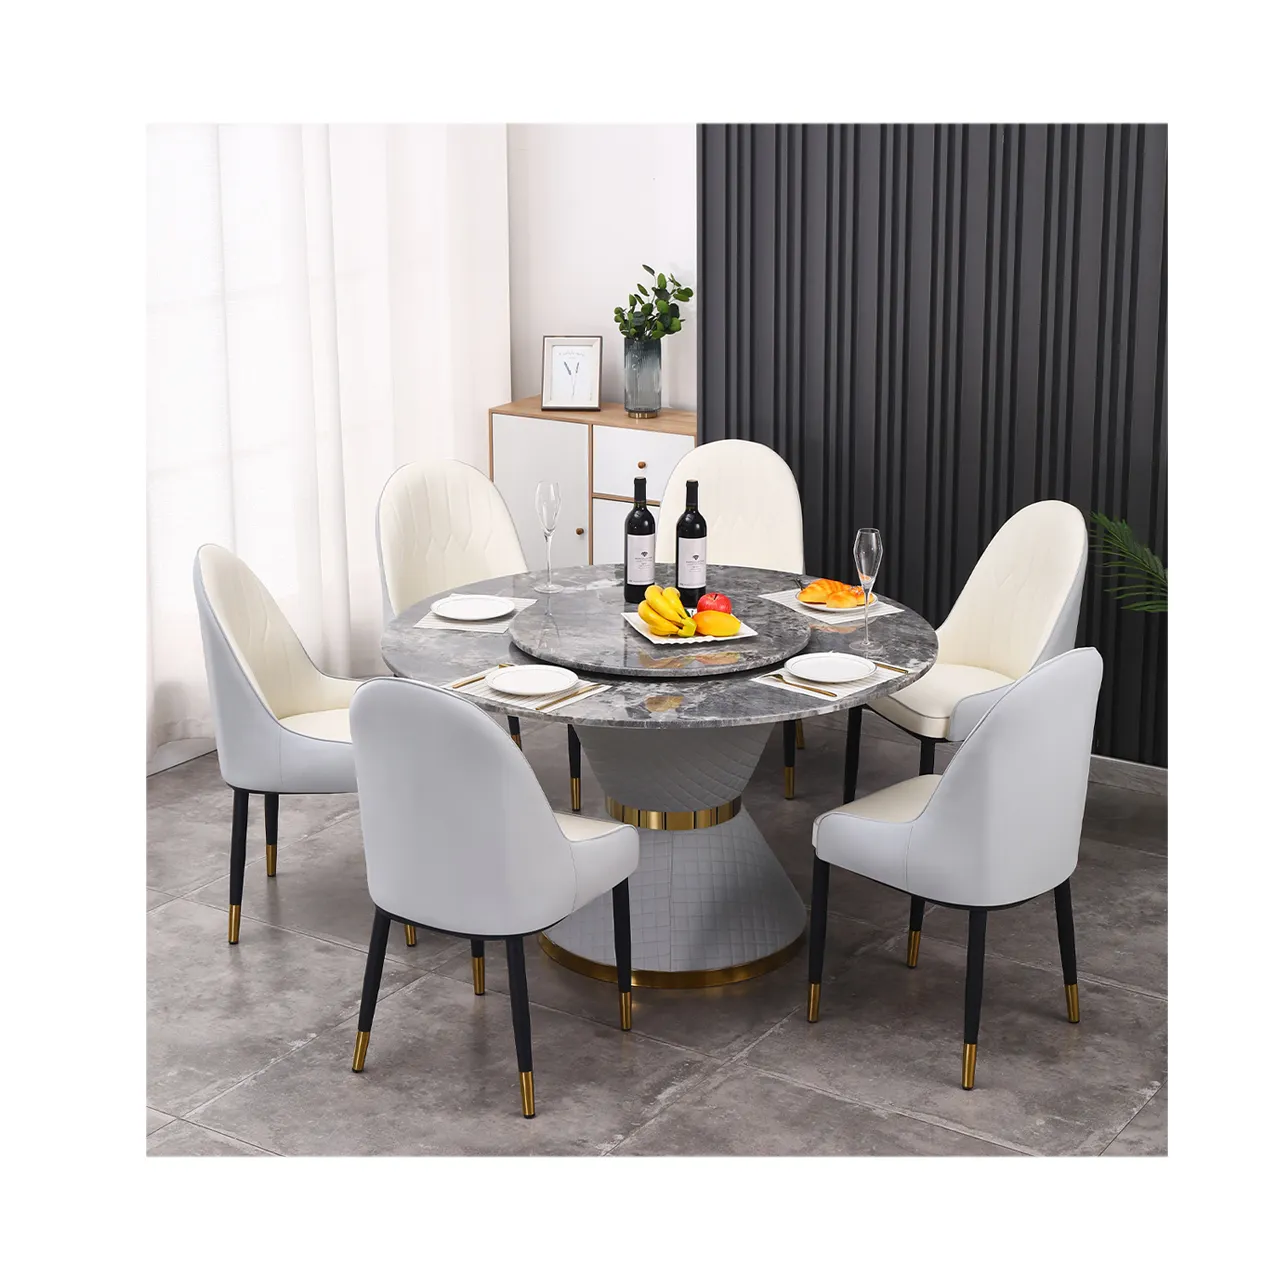 Dinning Furniture Home Furniture Classical UK Design Round Marble Stainless Steel Metal Modern Dining Table Chairs Set